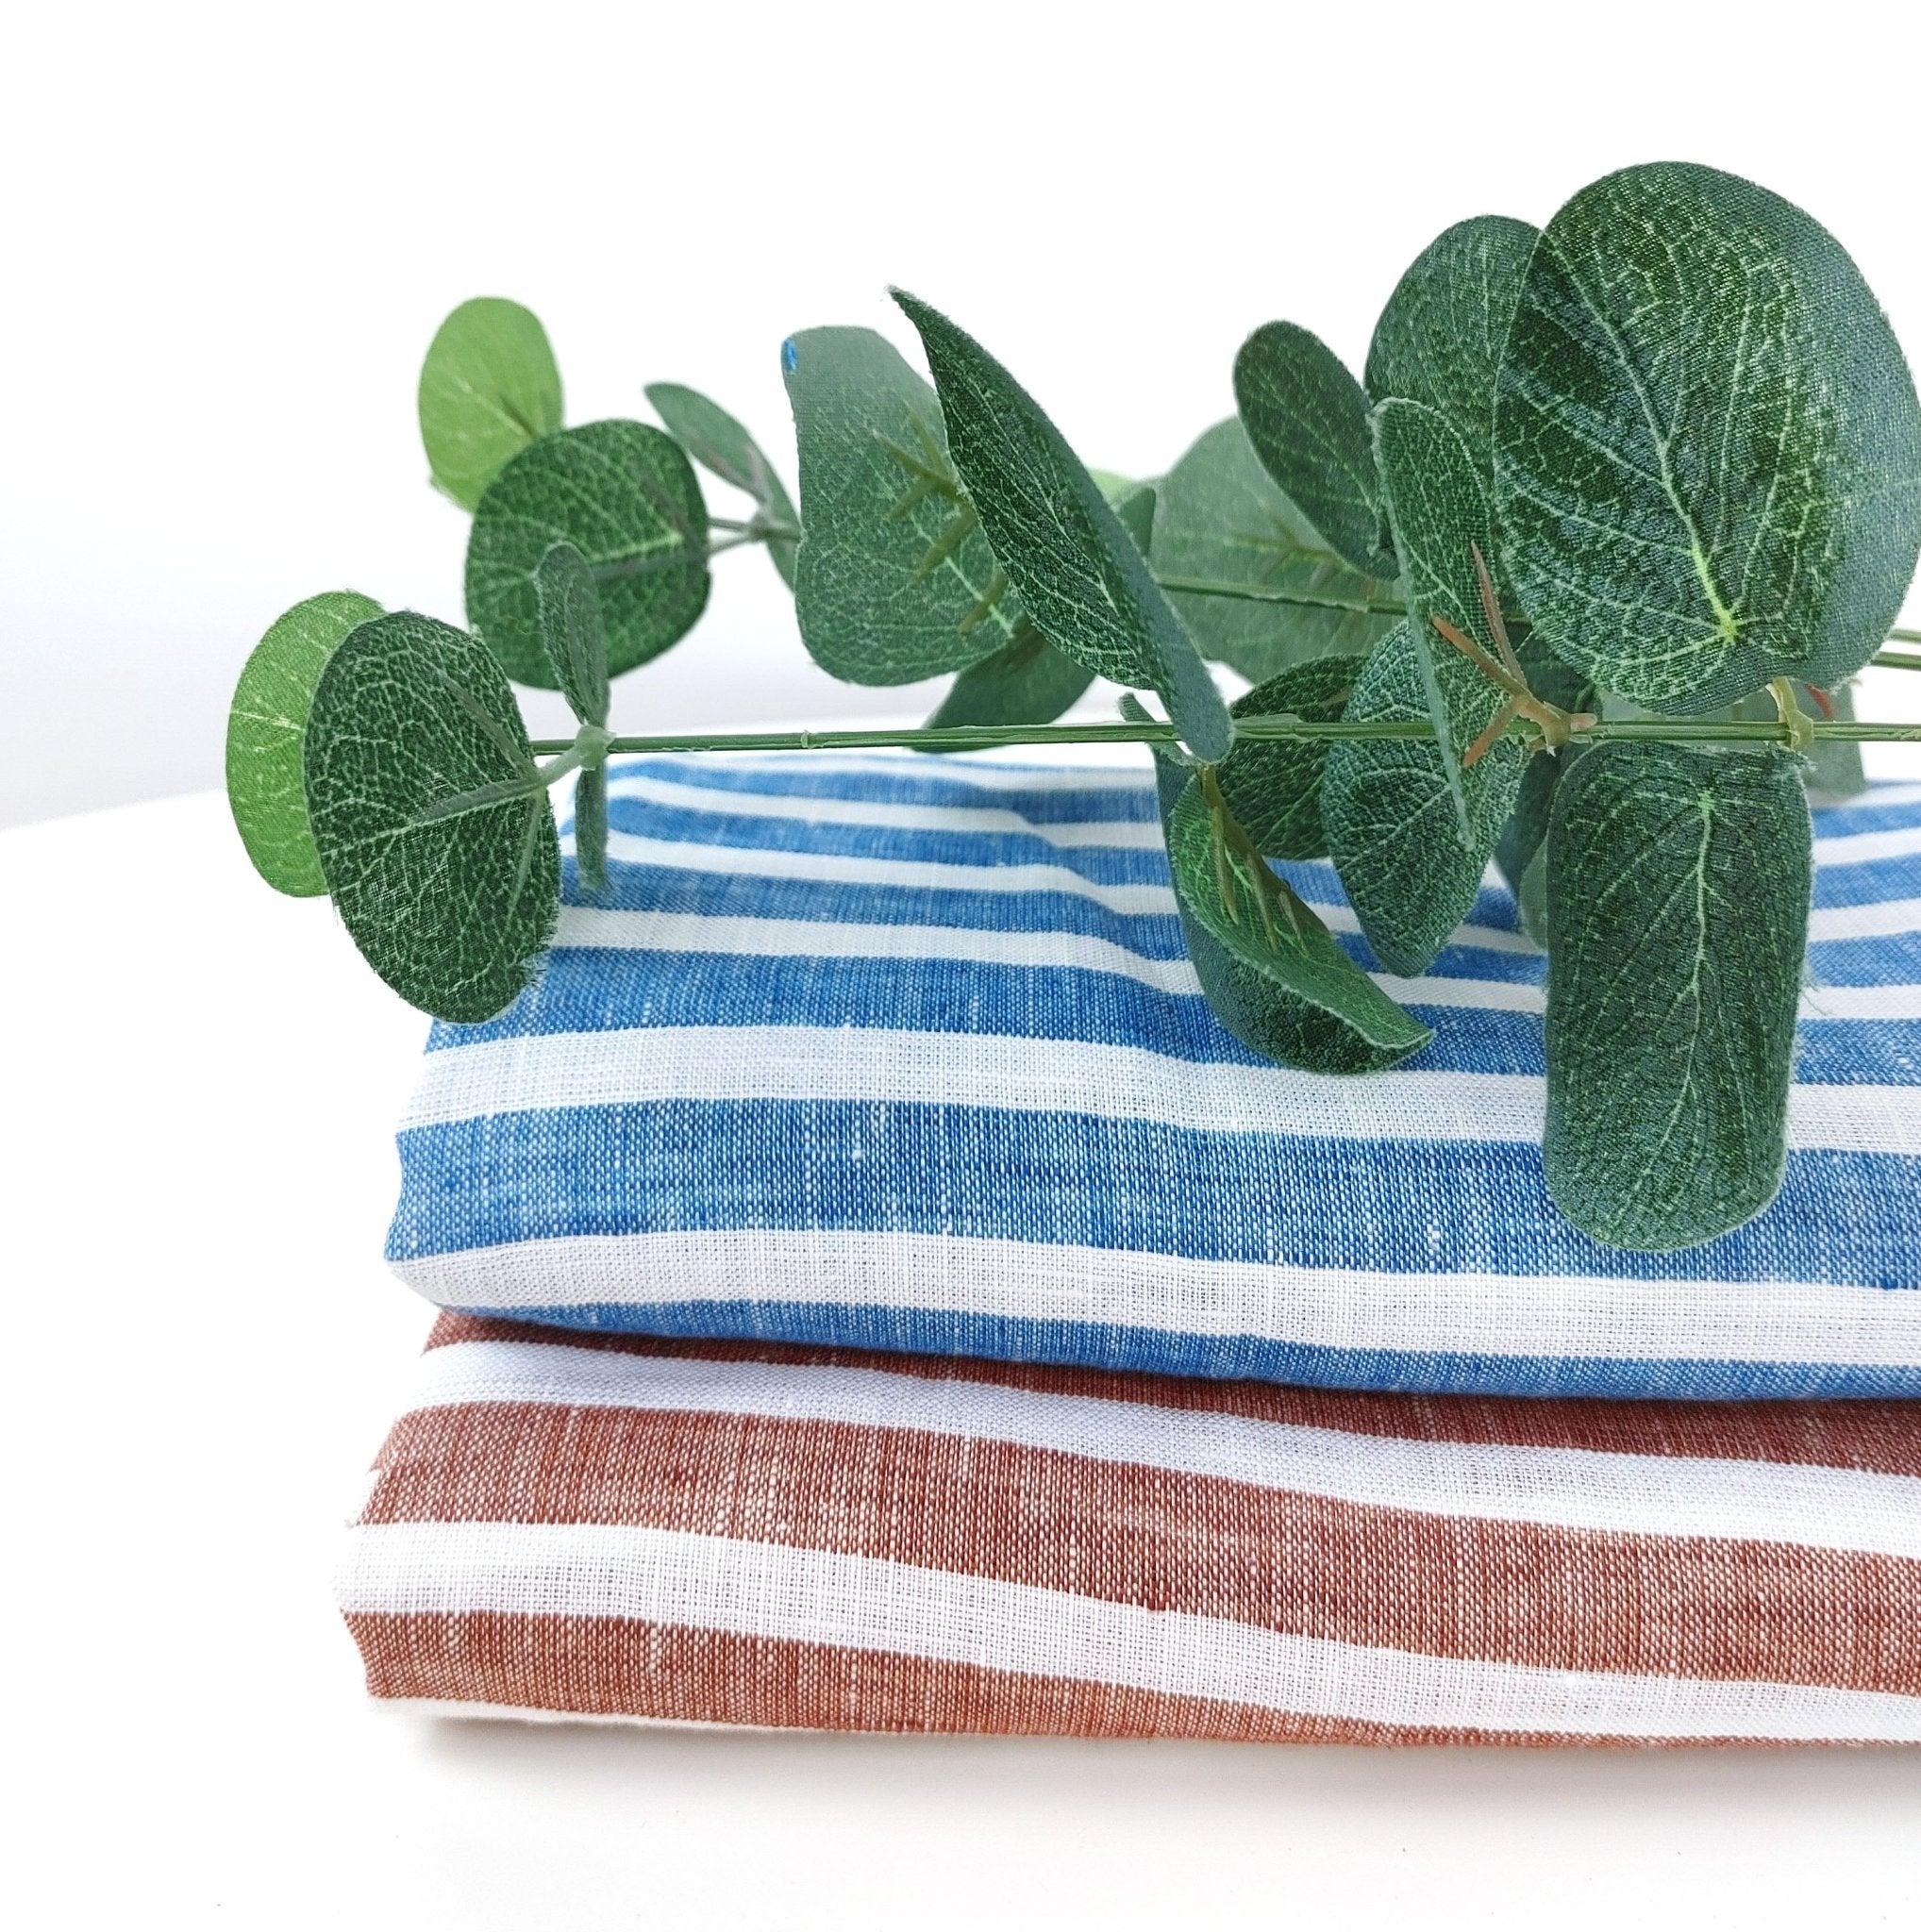 The Linen Lab - Linen Fabric Online Shop, Buy Online, by the Yard